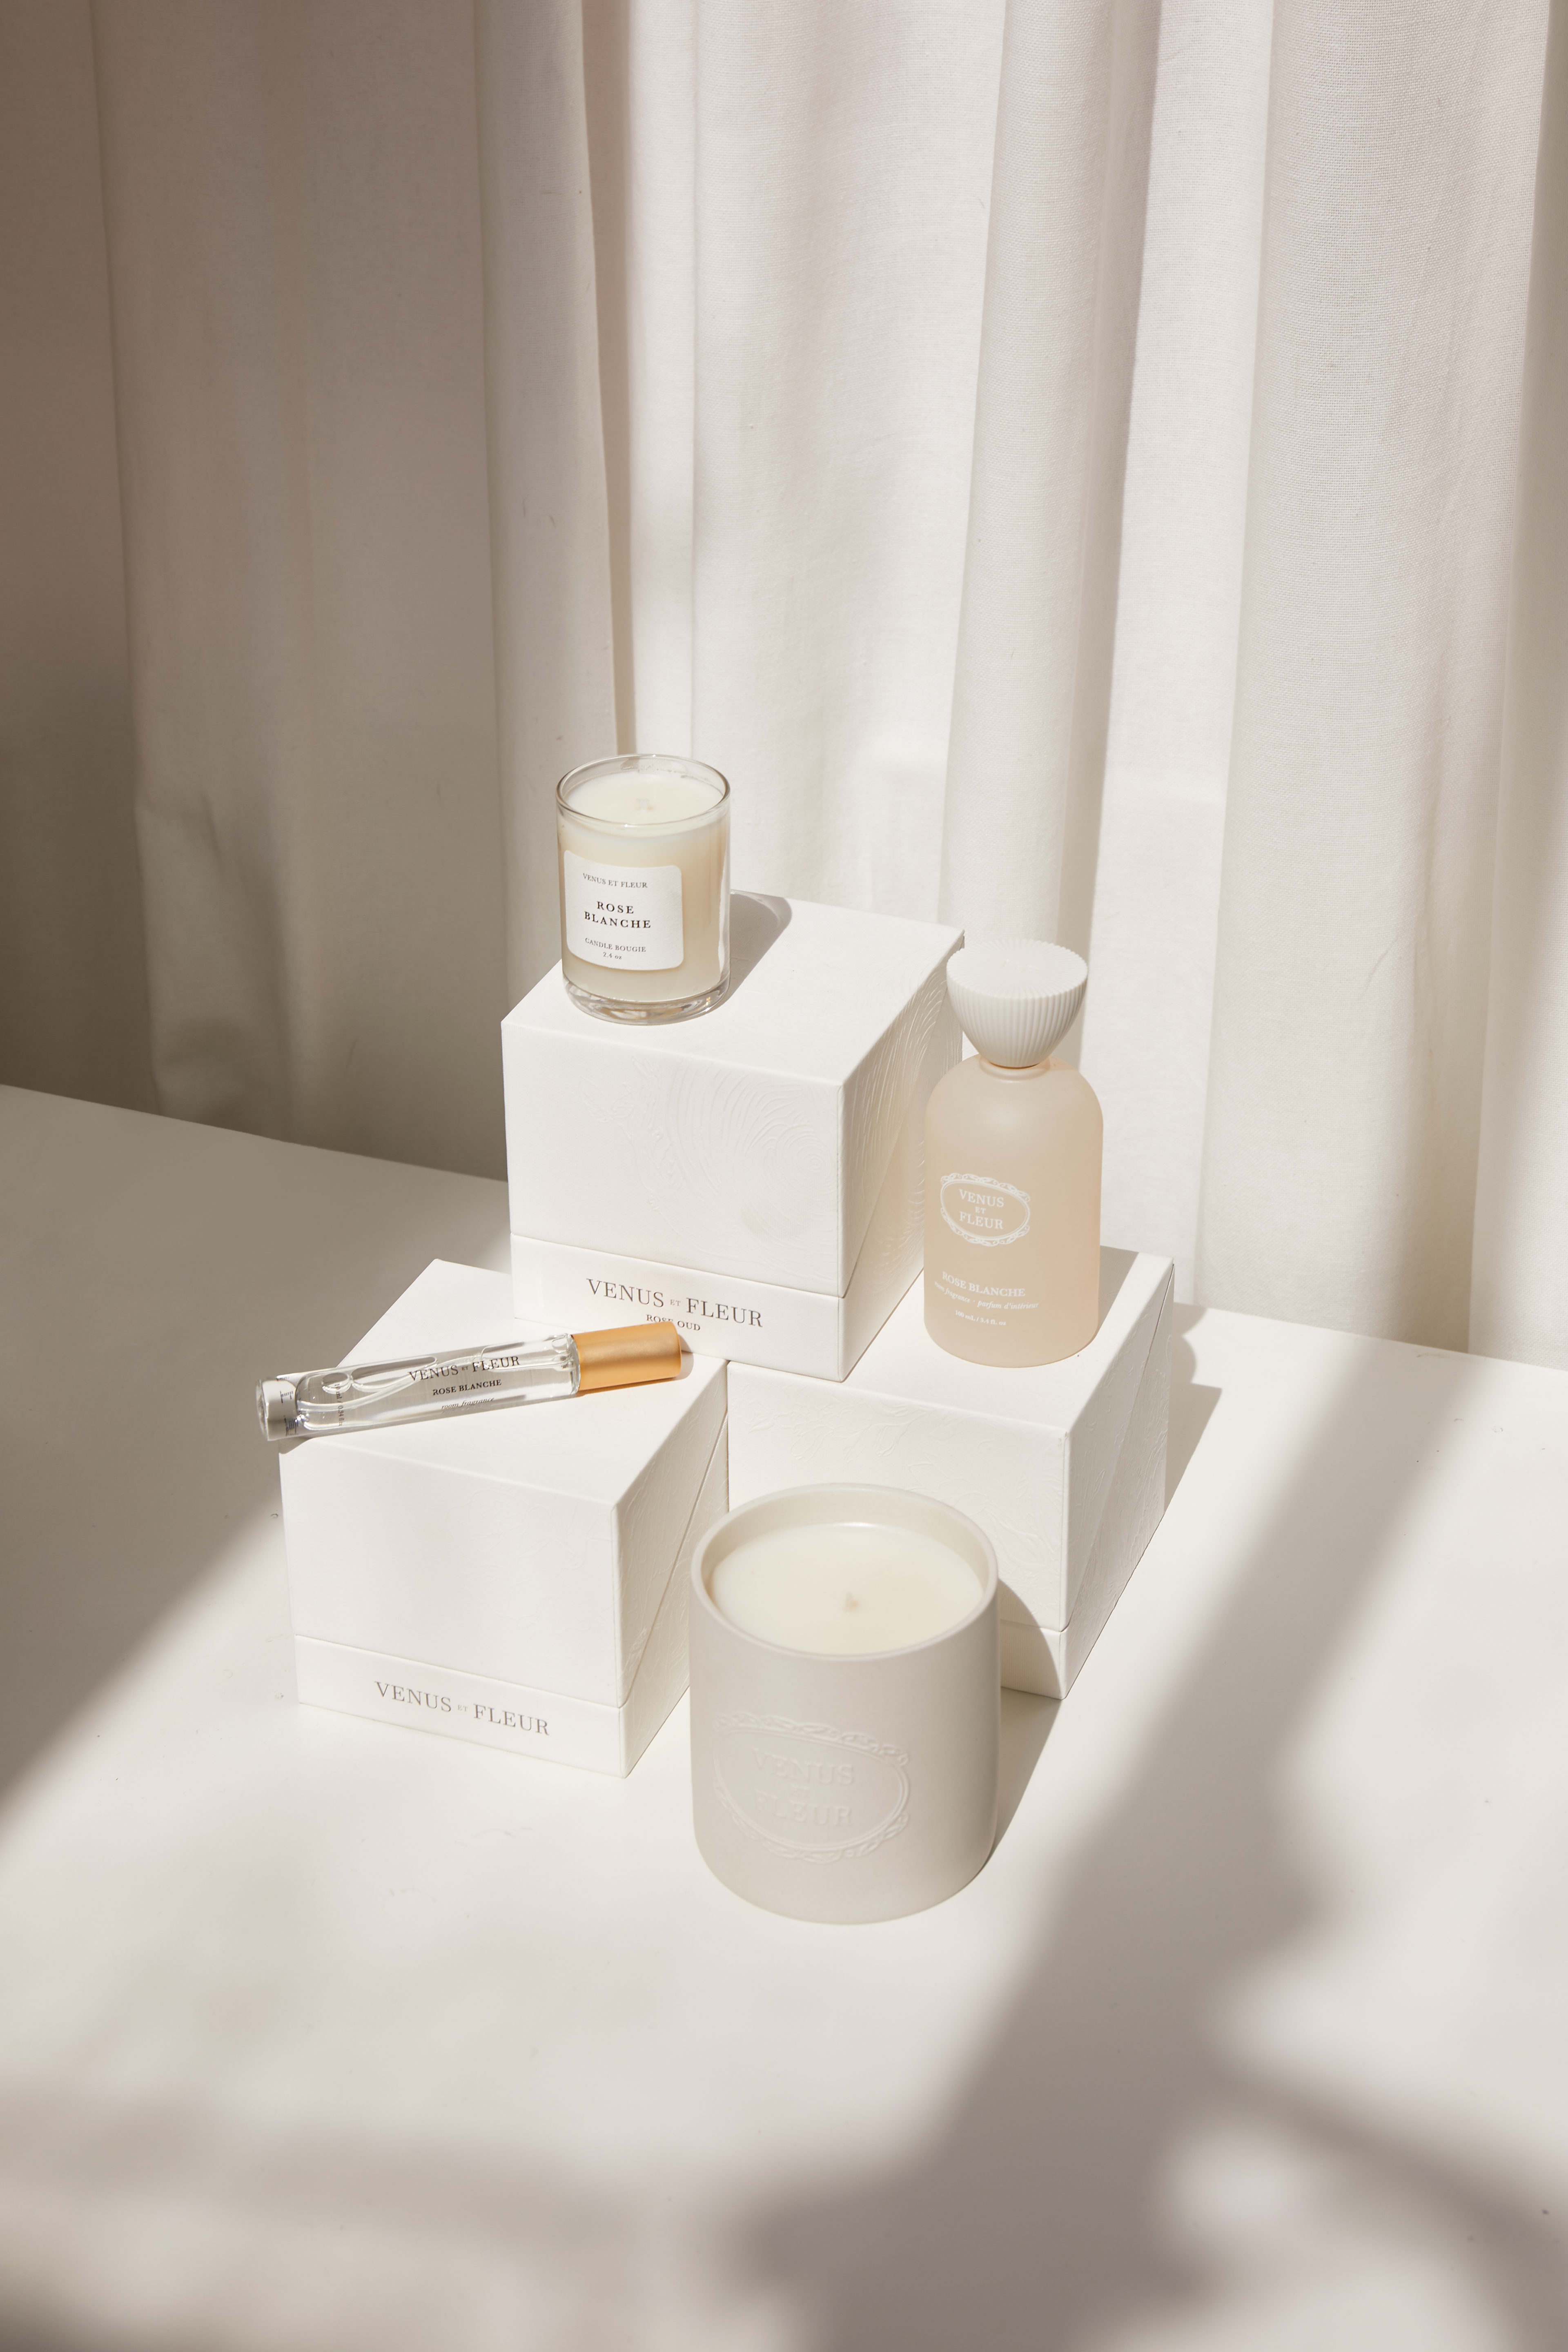 A minimal product photoshoot featuring a white candle and holder paired with a box on a table.